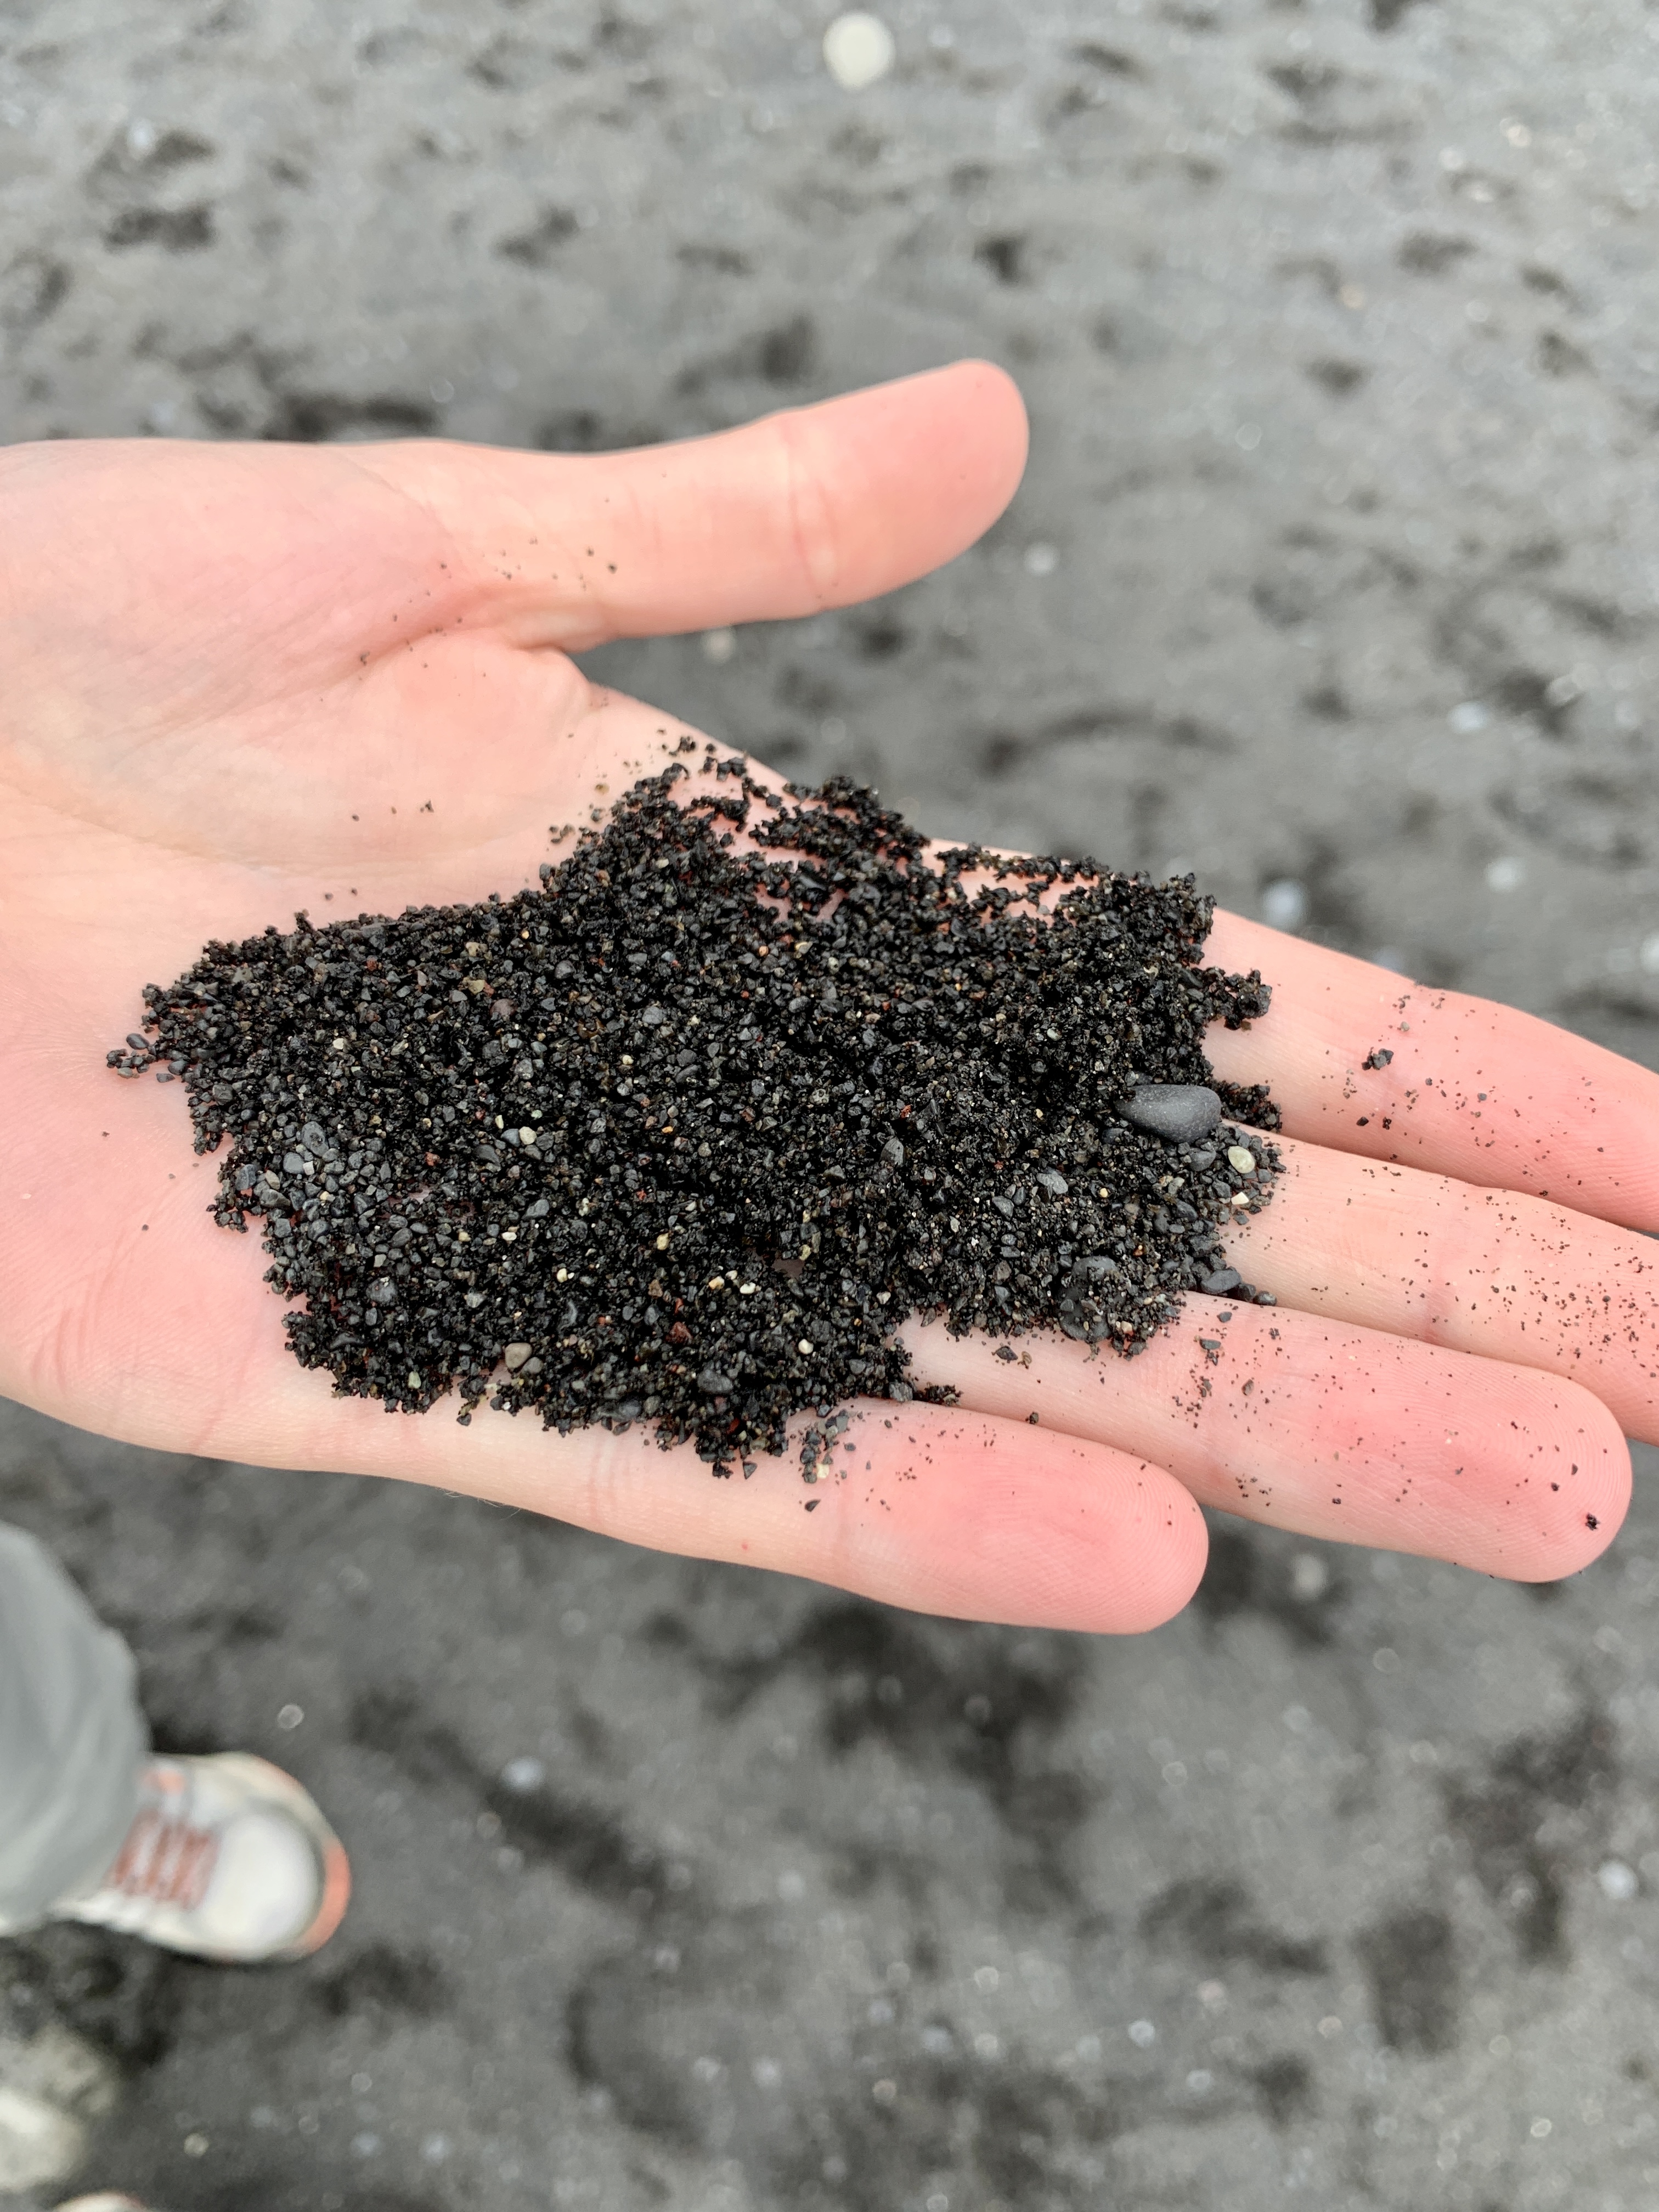 Mark holding a handful of the black sand